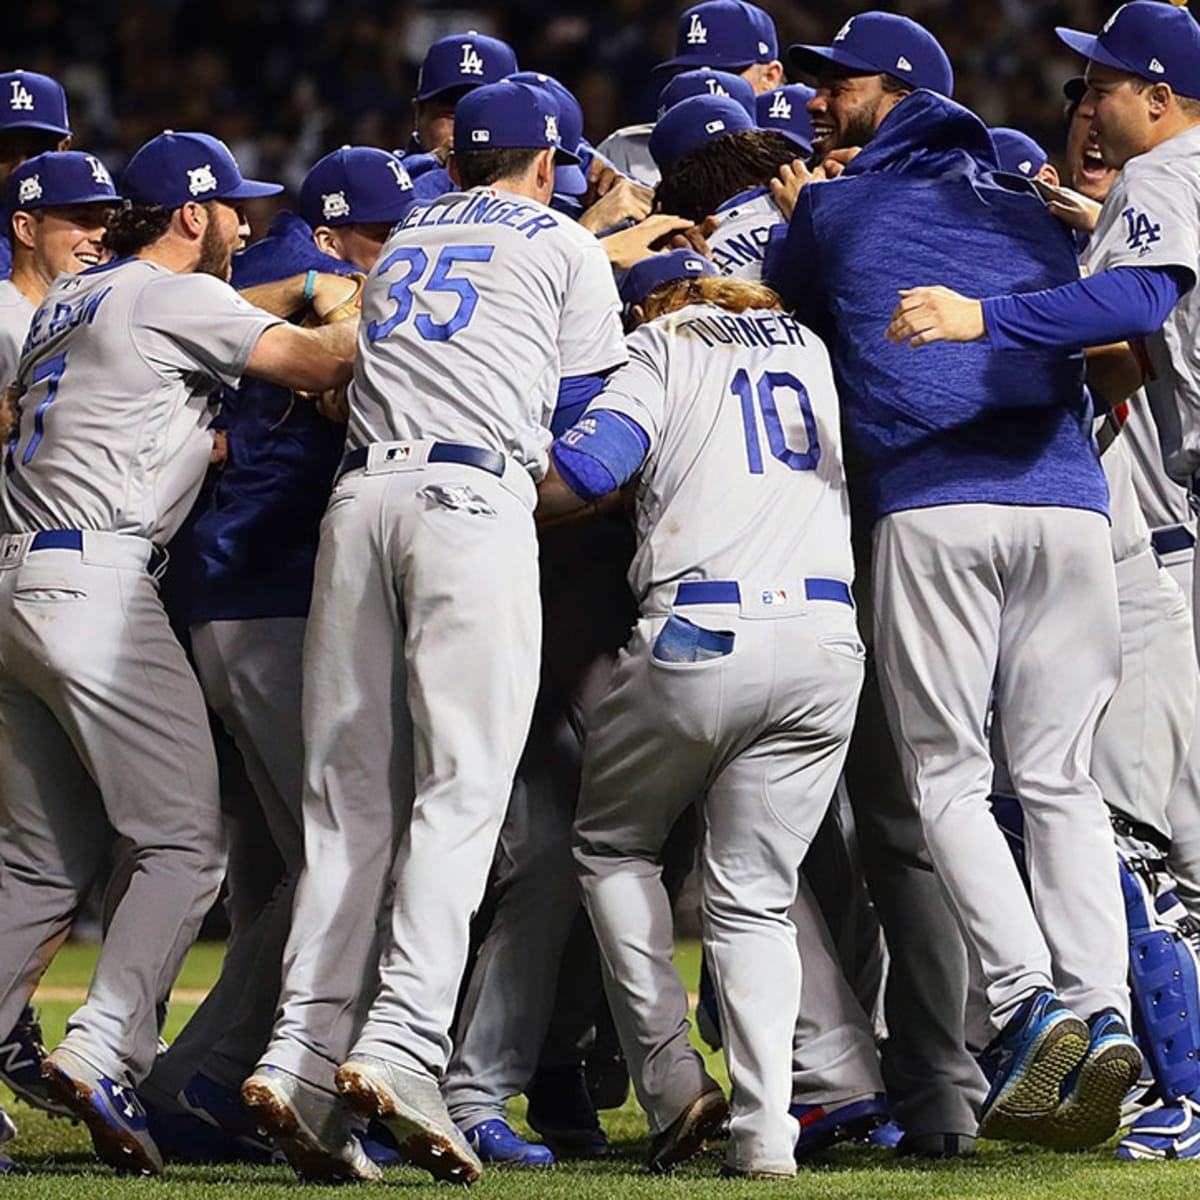 Exactly 29 years after Kirk Gibson, Justin Turner hit a postseason walk-off  homer for the Dodgers